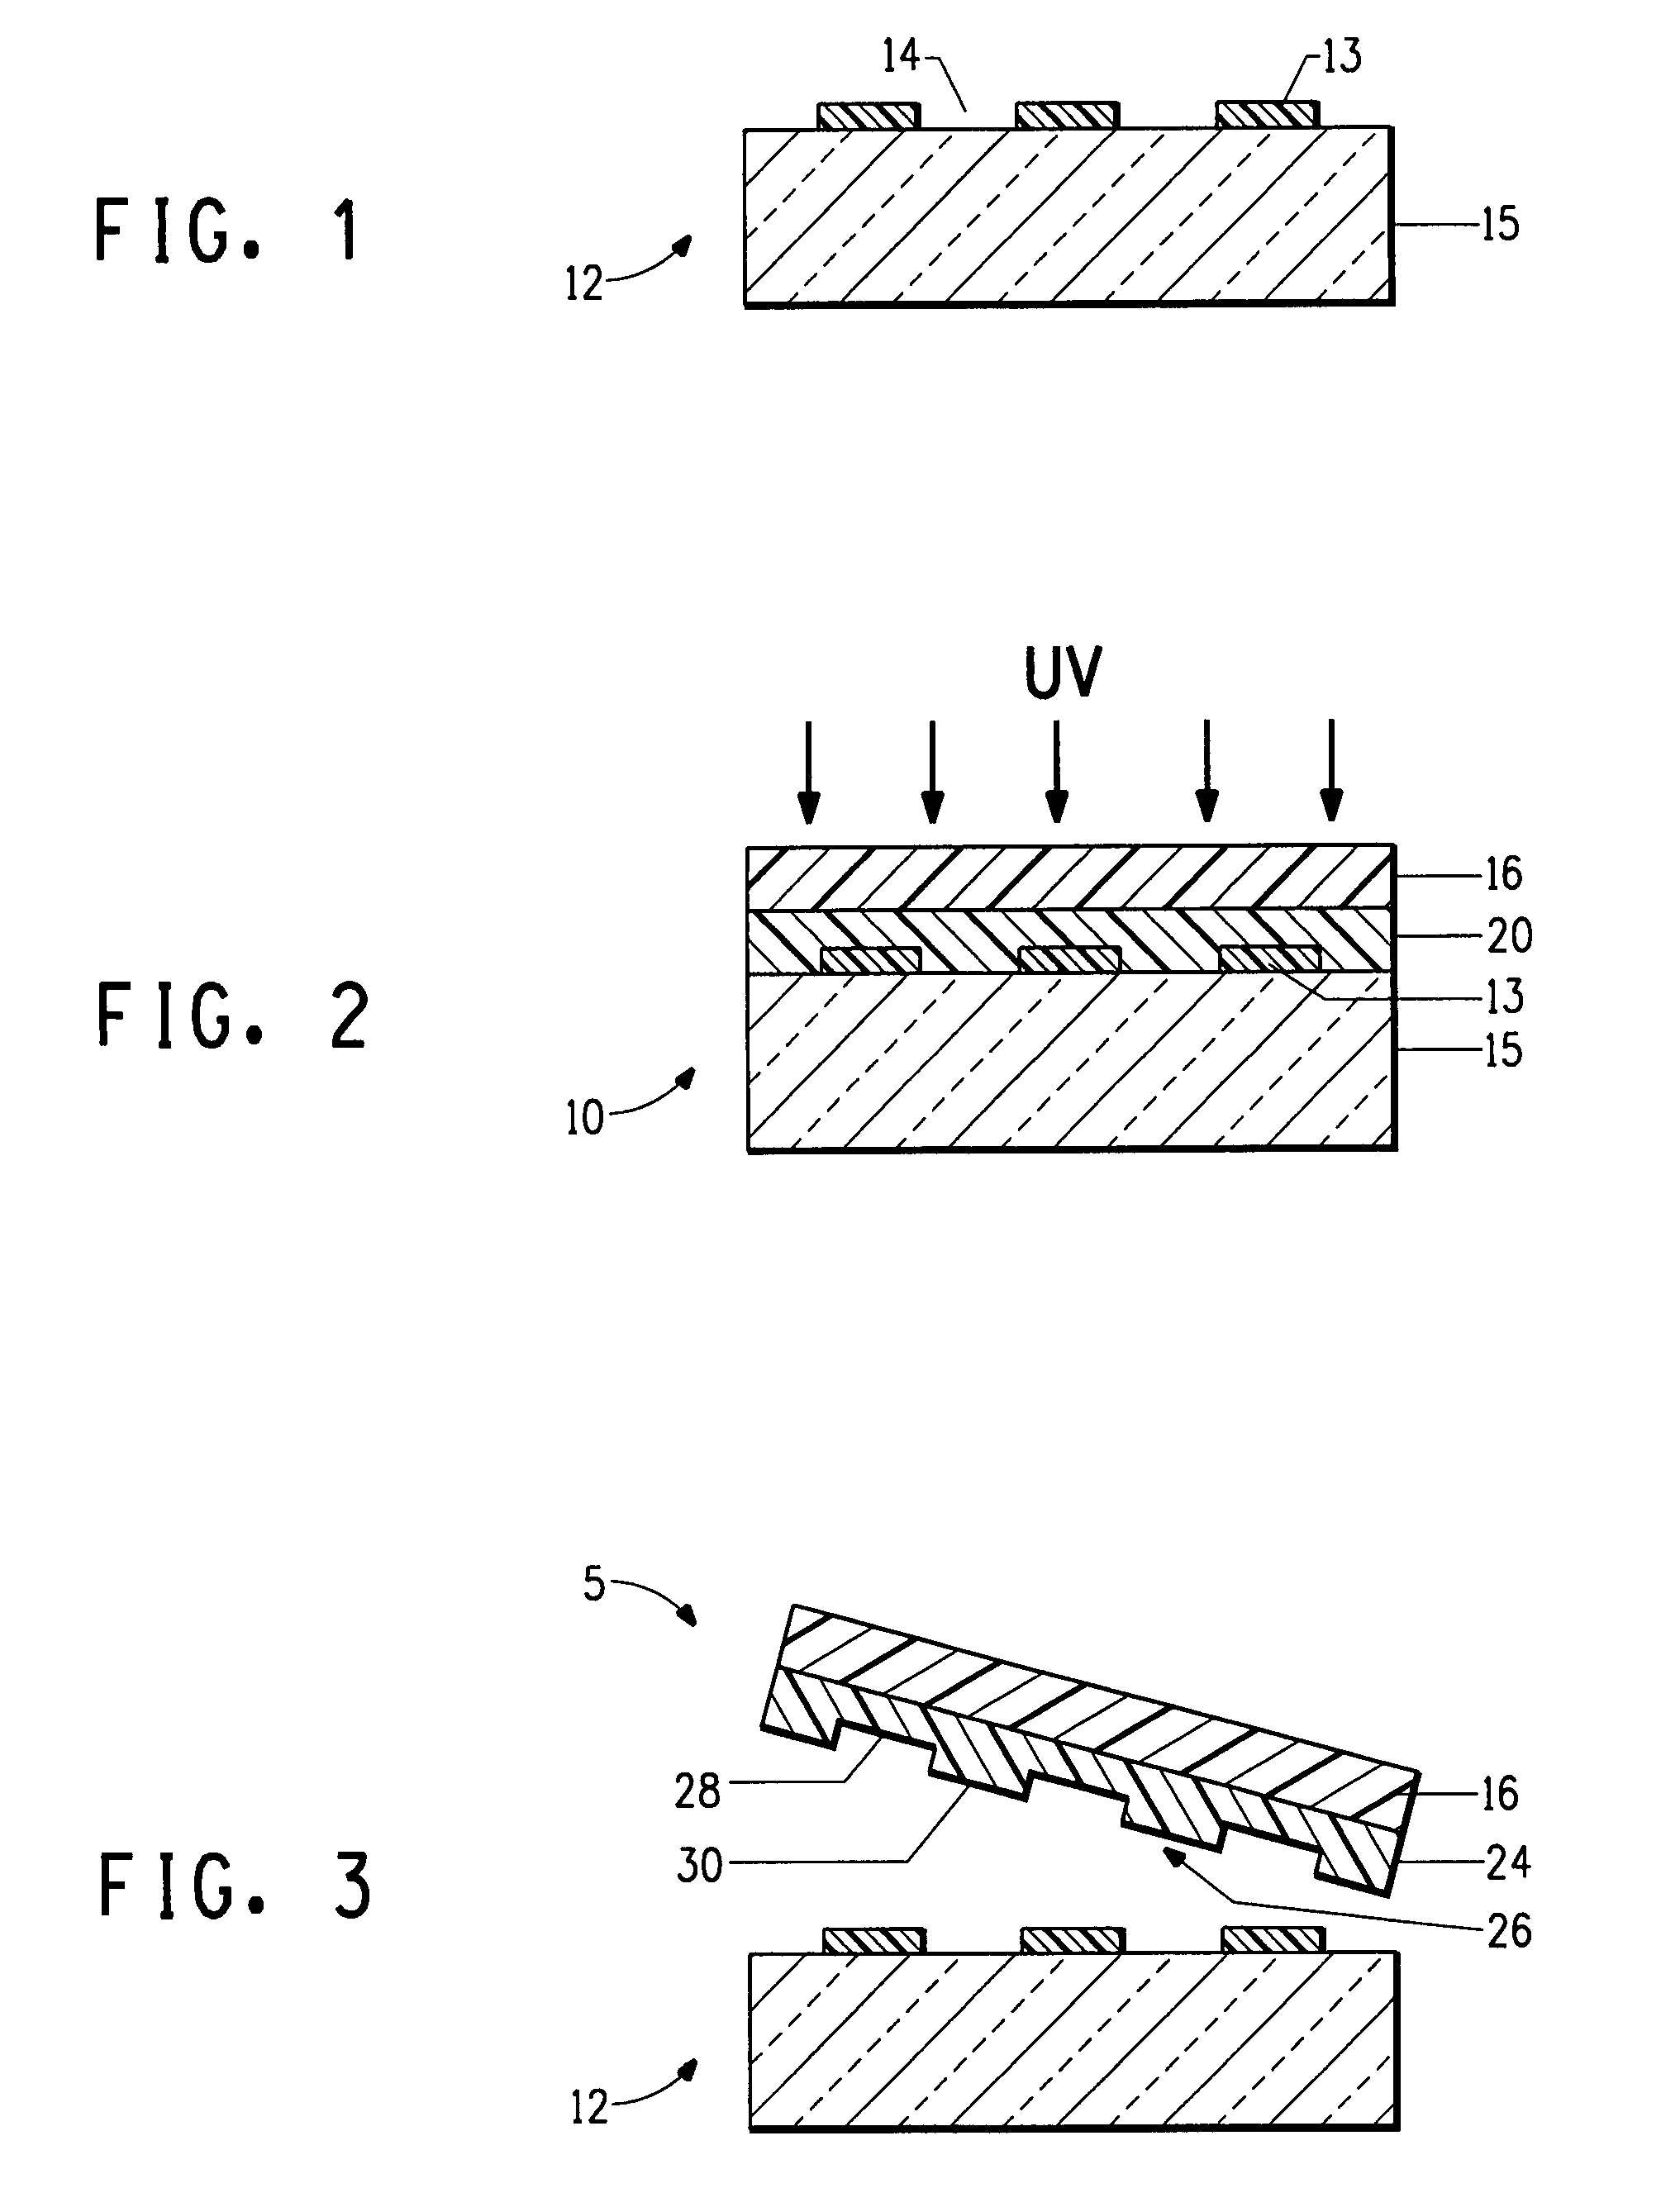 Method to form a pattern of functional material on a substrate using a mask material